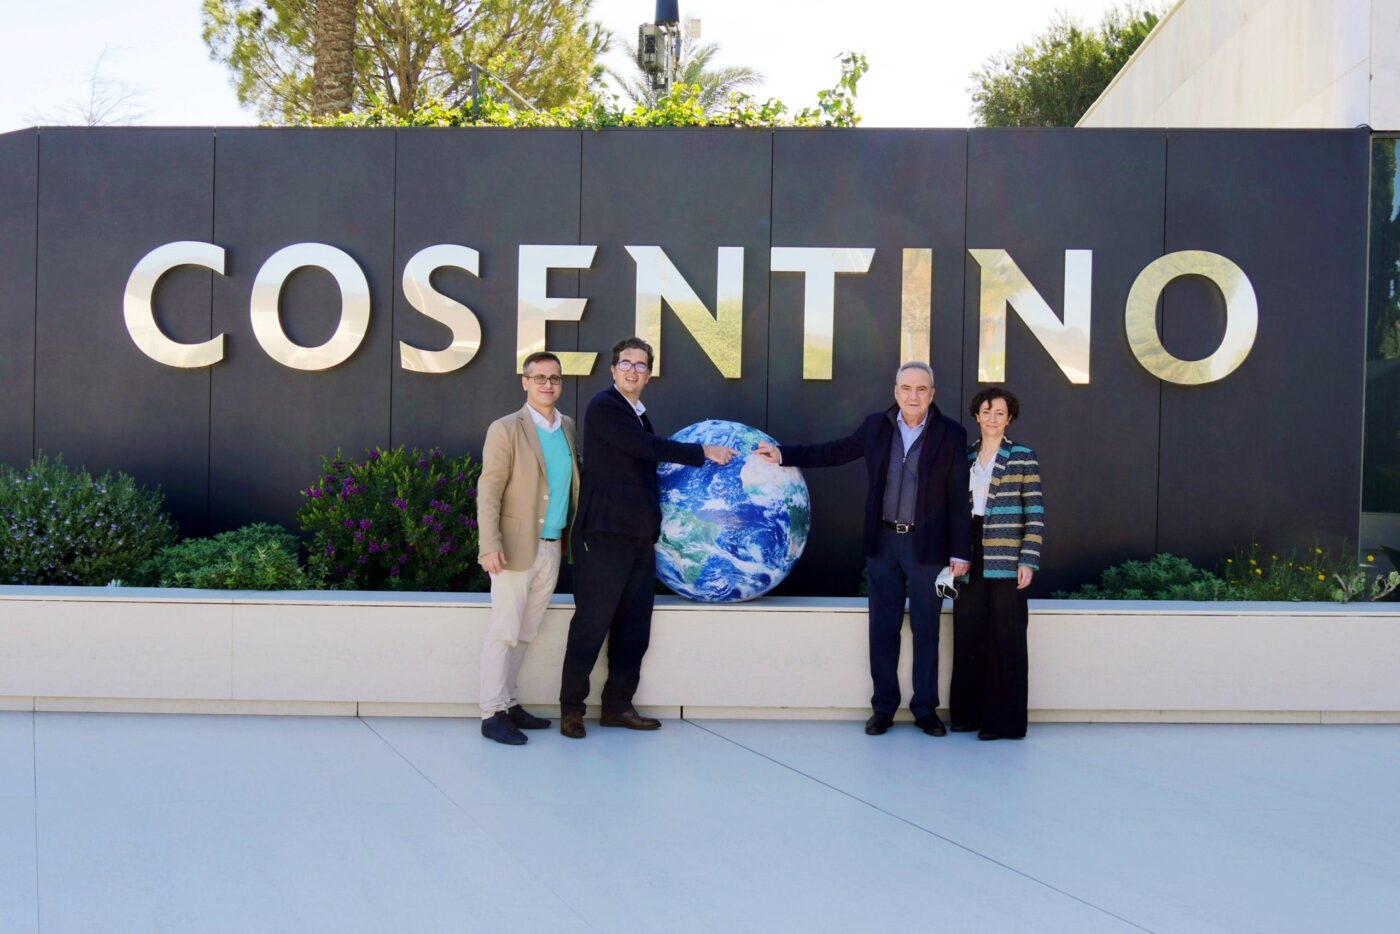 Cosentino reaffirms its commitment to protect the planet in partnership with Sustenta